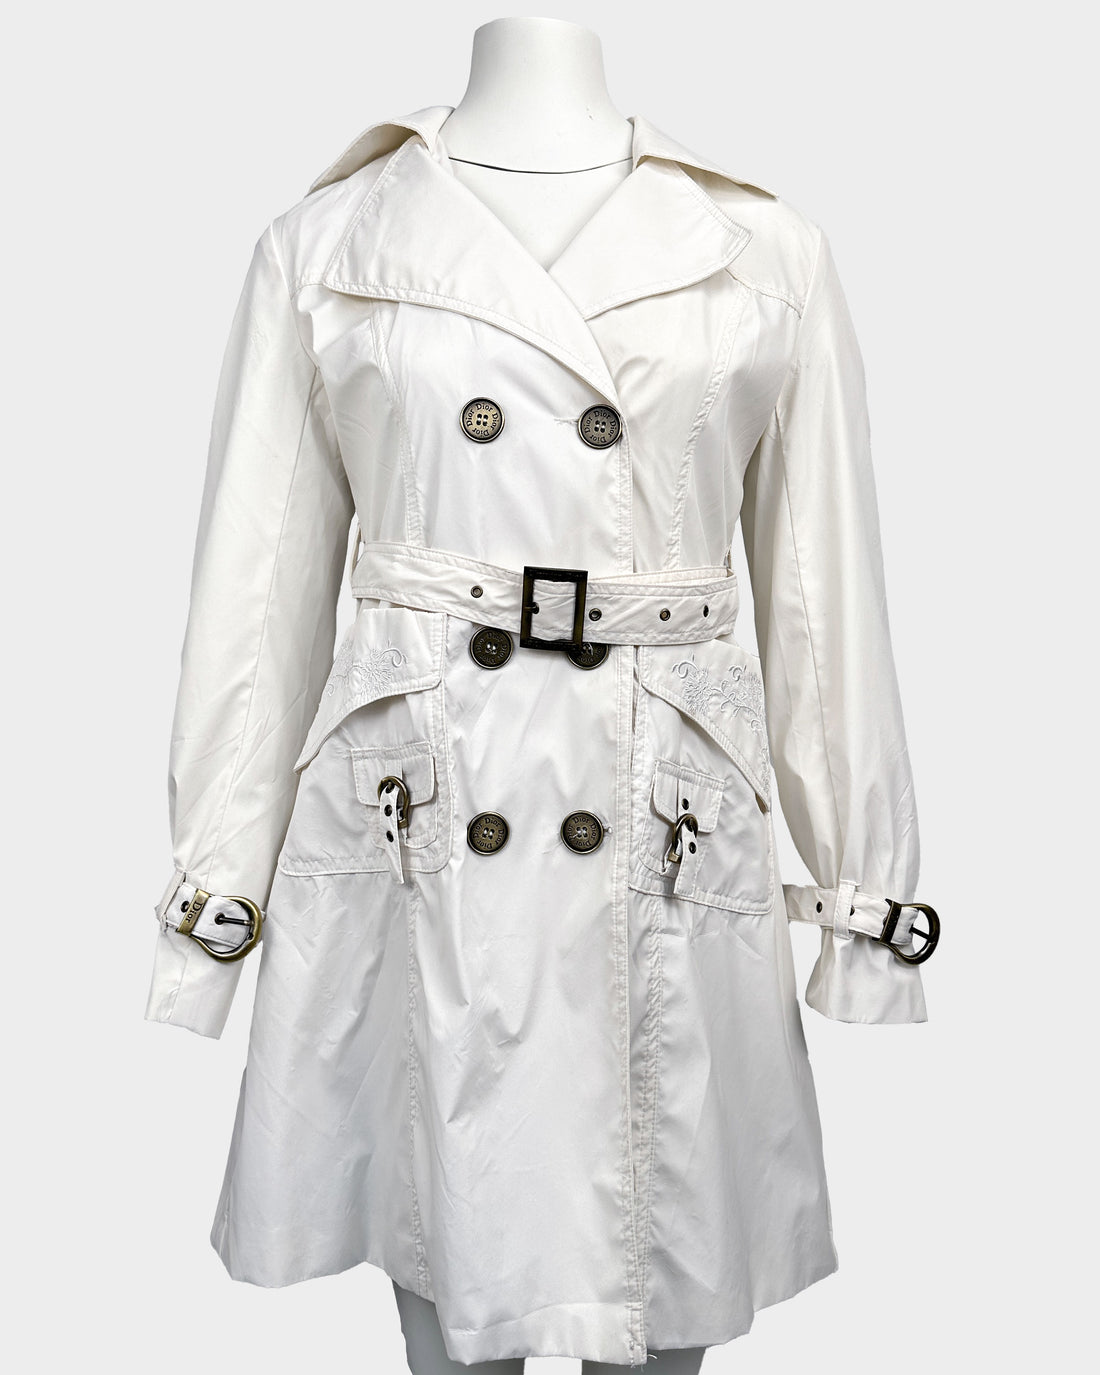 Christian Dior White Belted Trench Coat 1990's